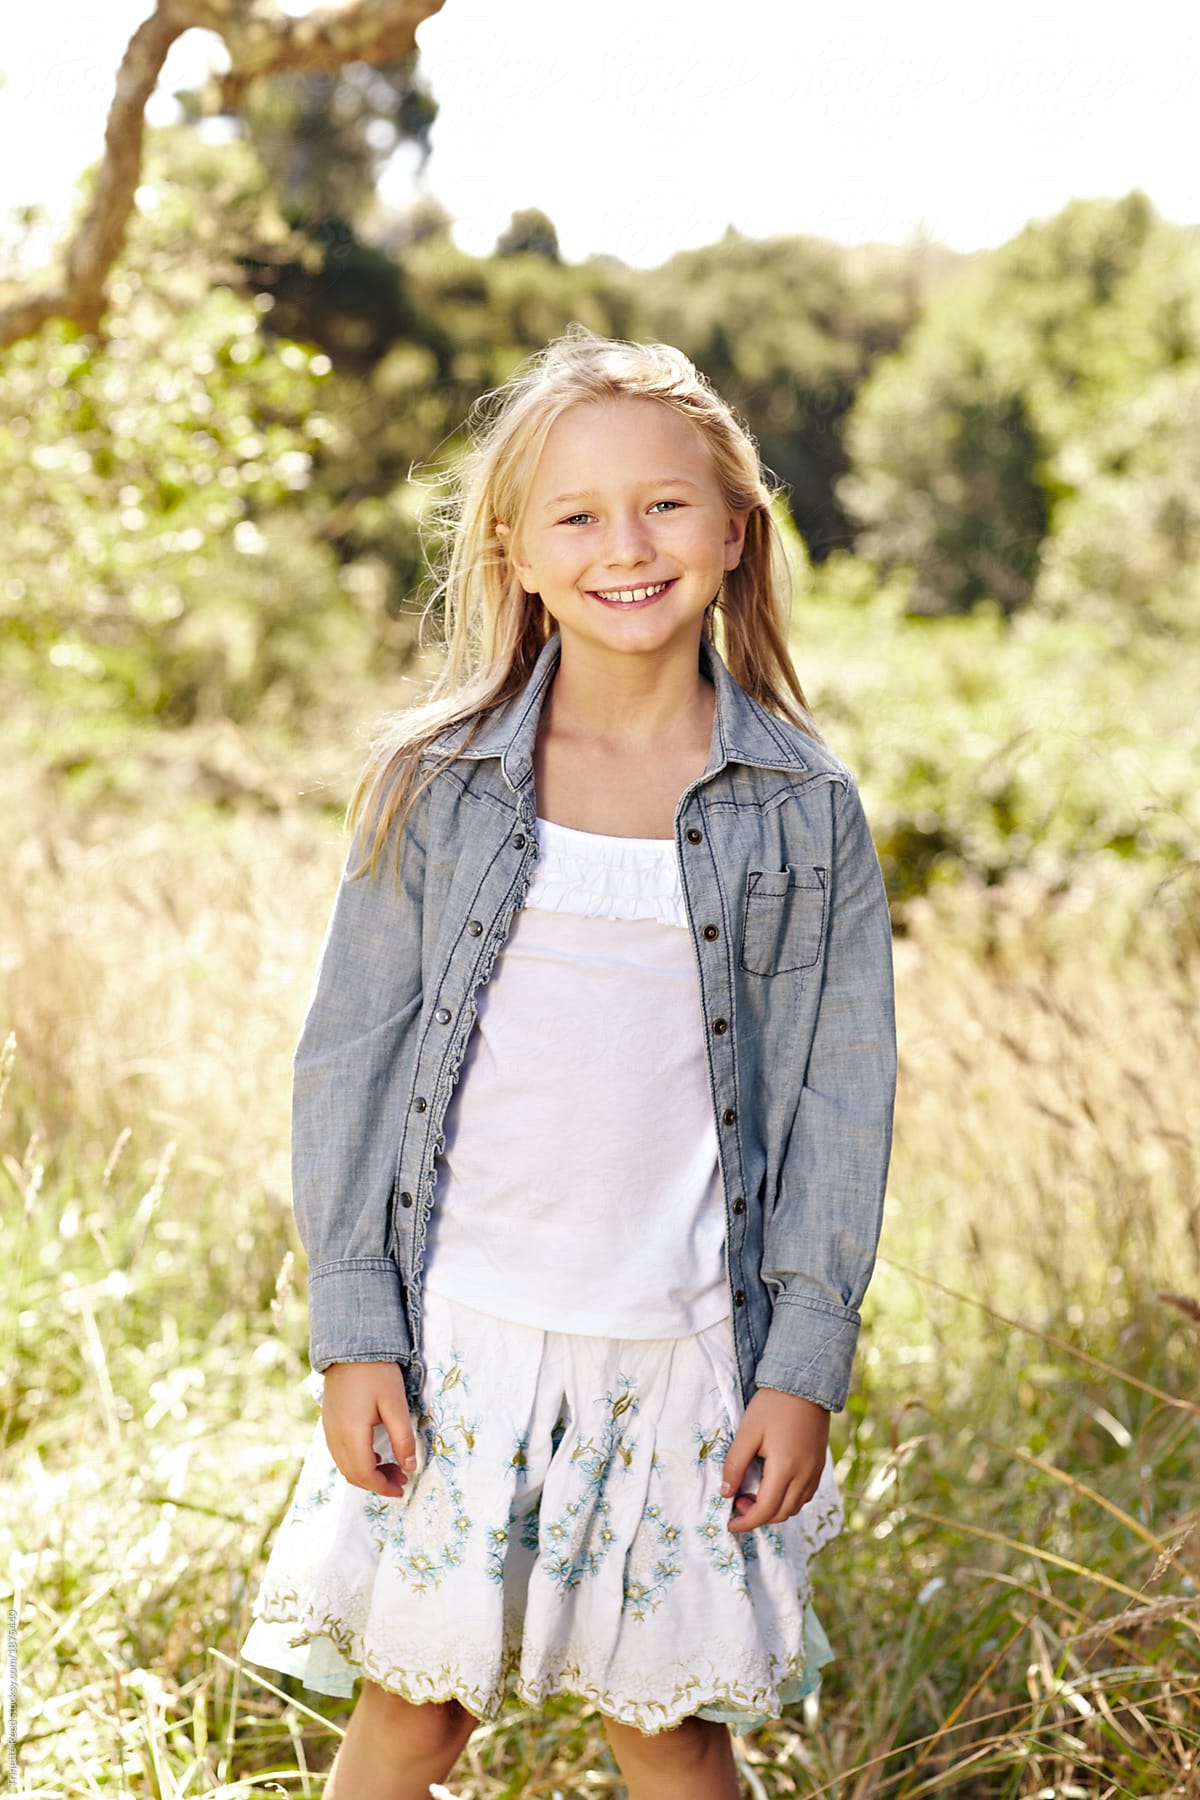 Portrait Of Little Girl With Blonde Hair Outdoors ...